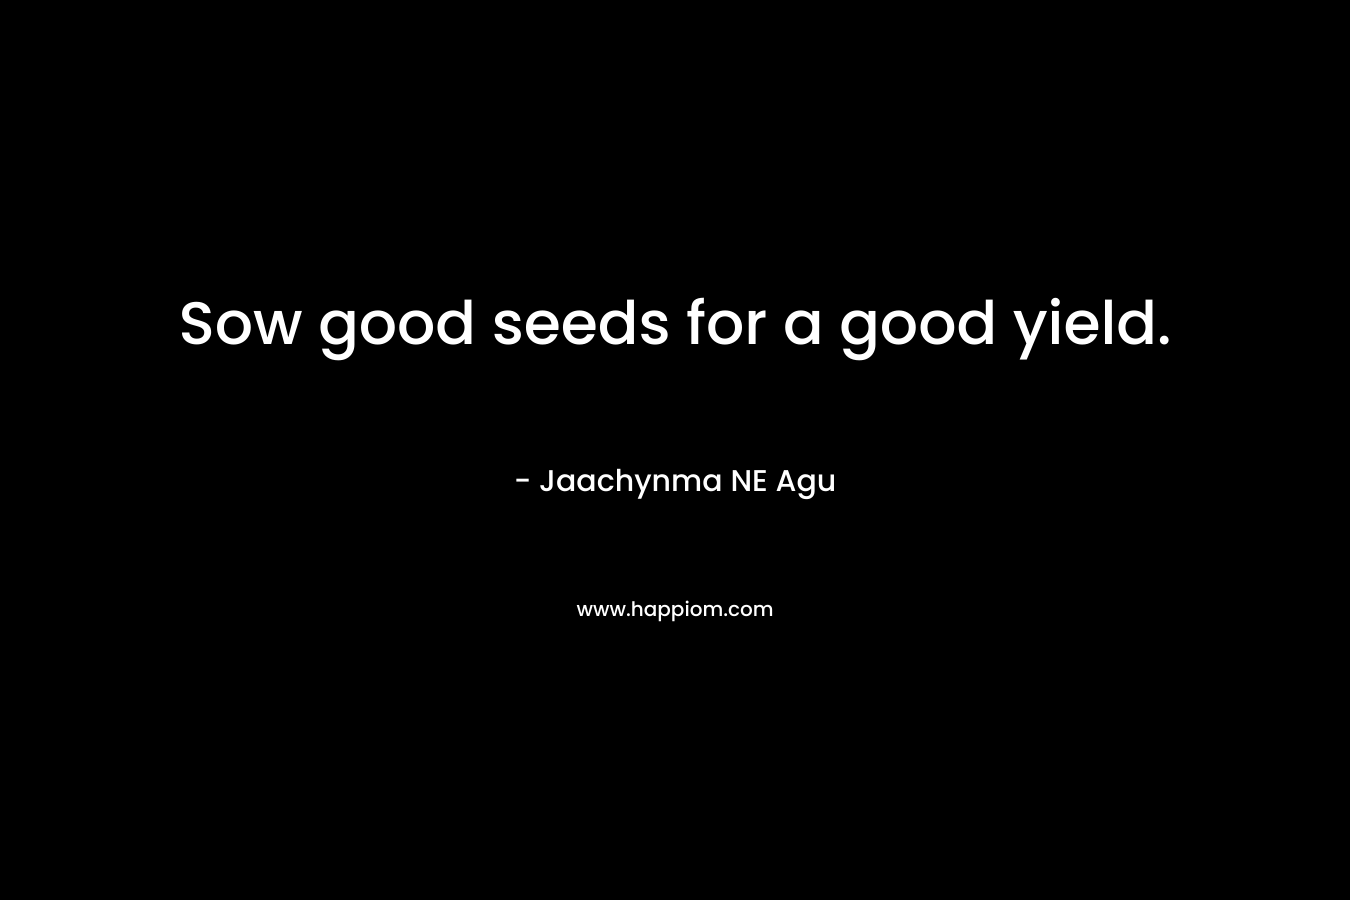 Sow good seeds for a good yield.